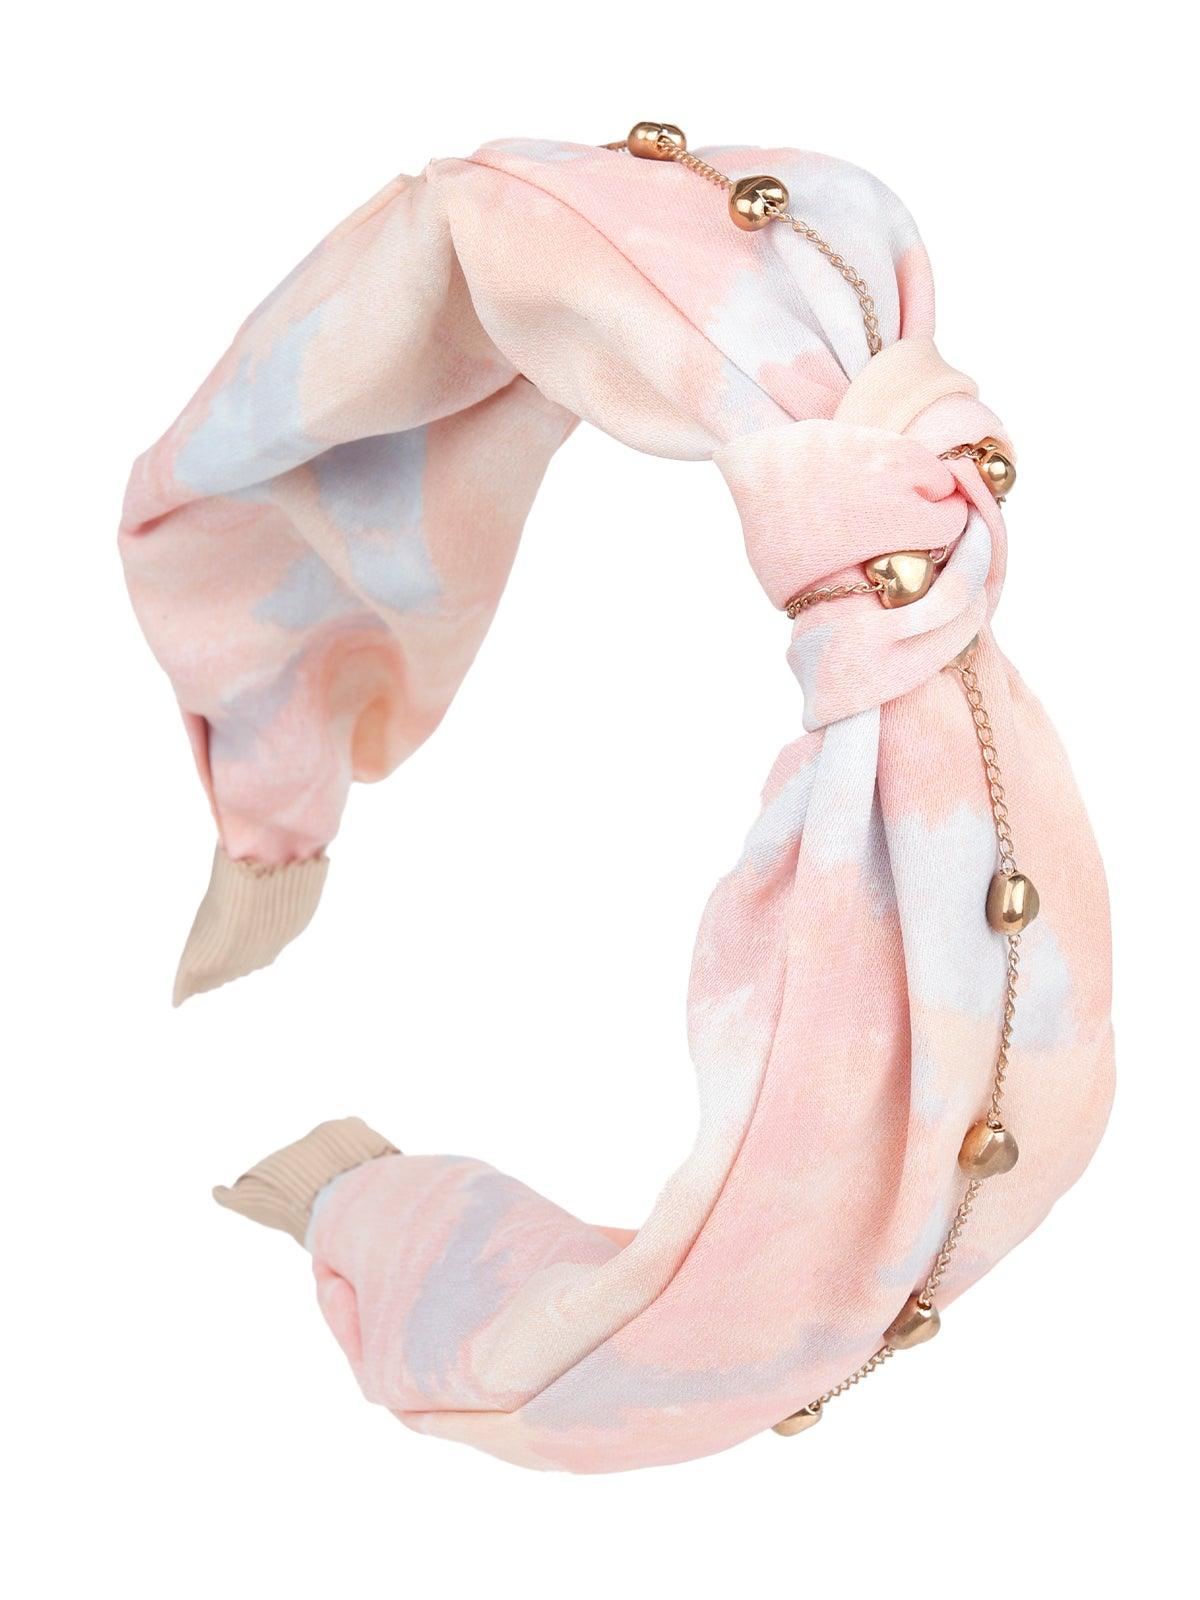 Candy-Floss Creamy Pastel Coloured Chained Hairband -Pink - Odette